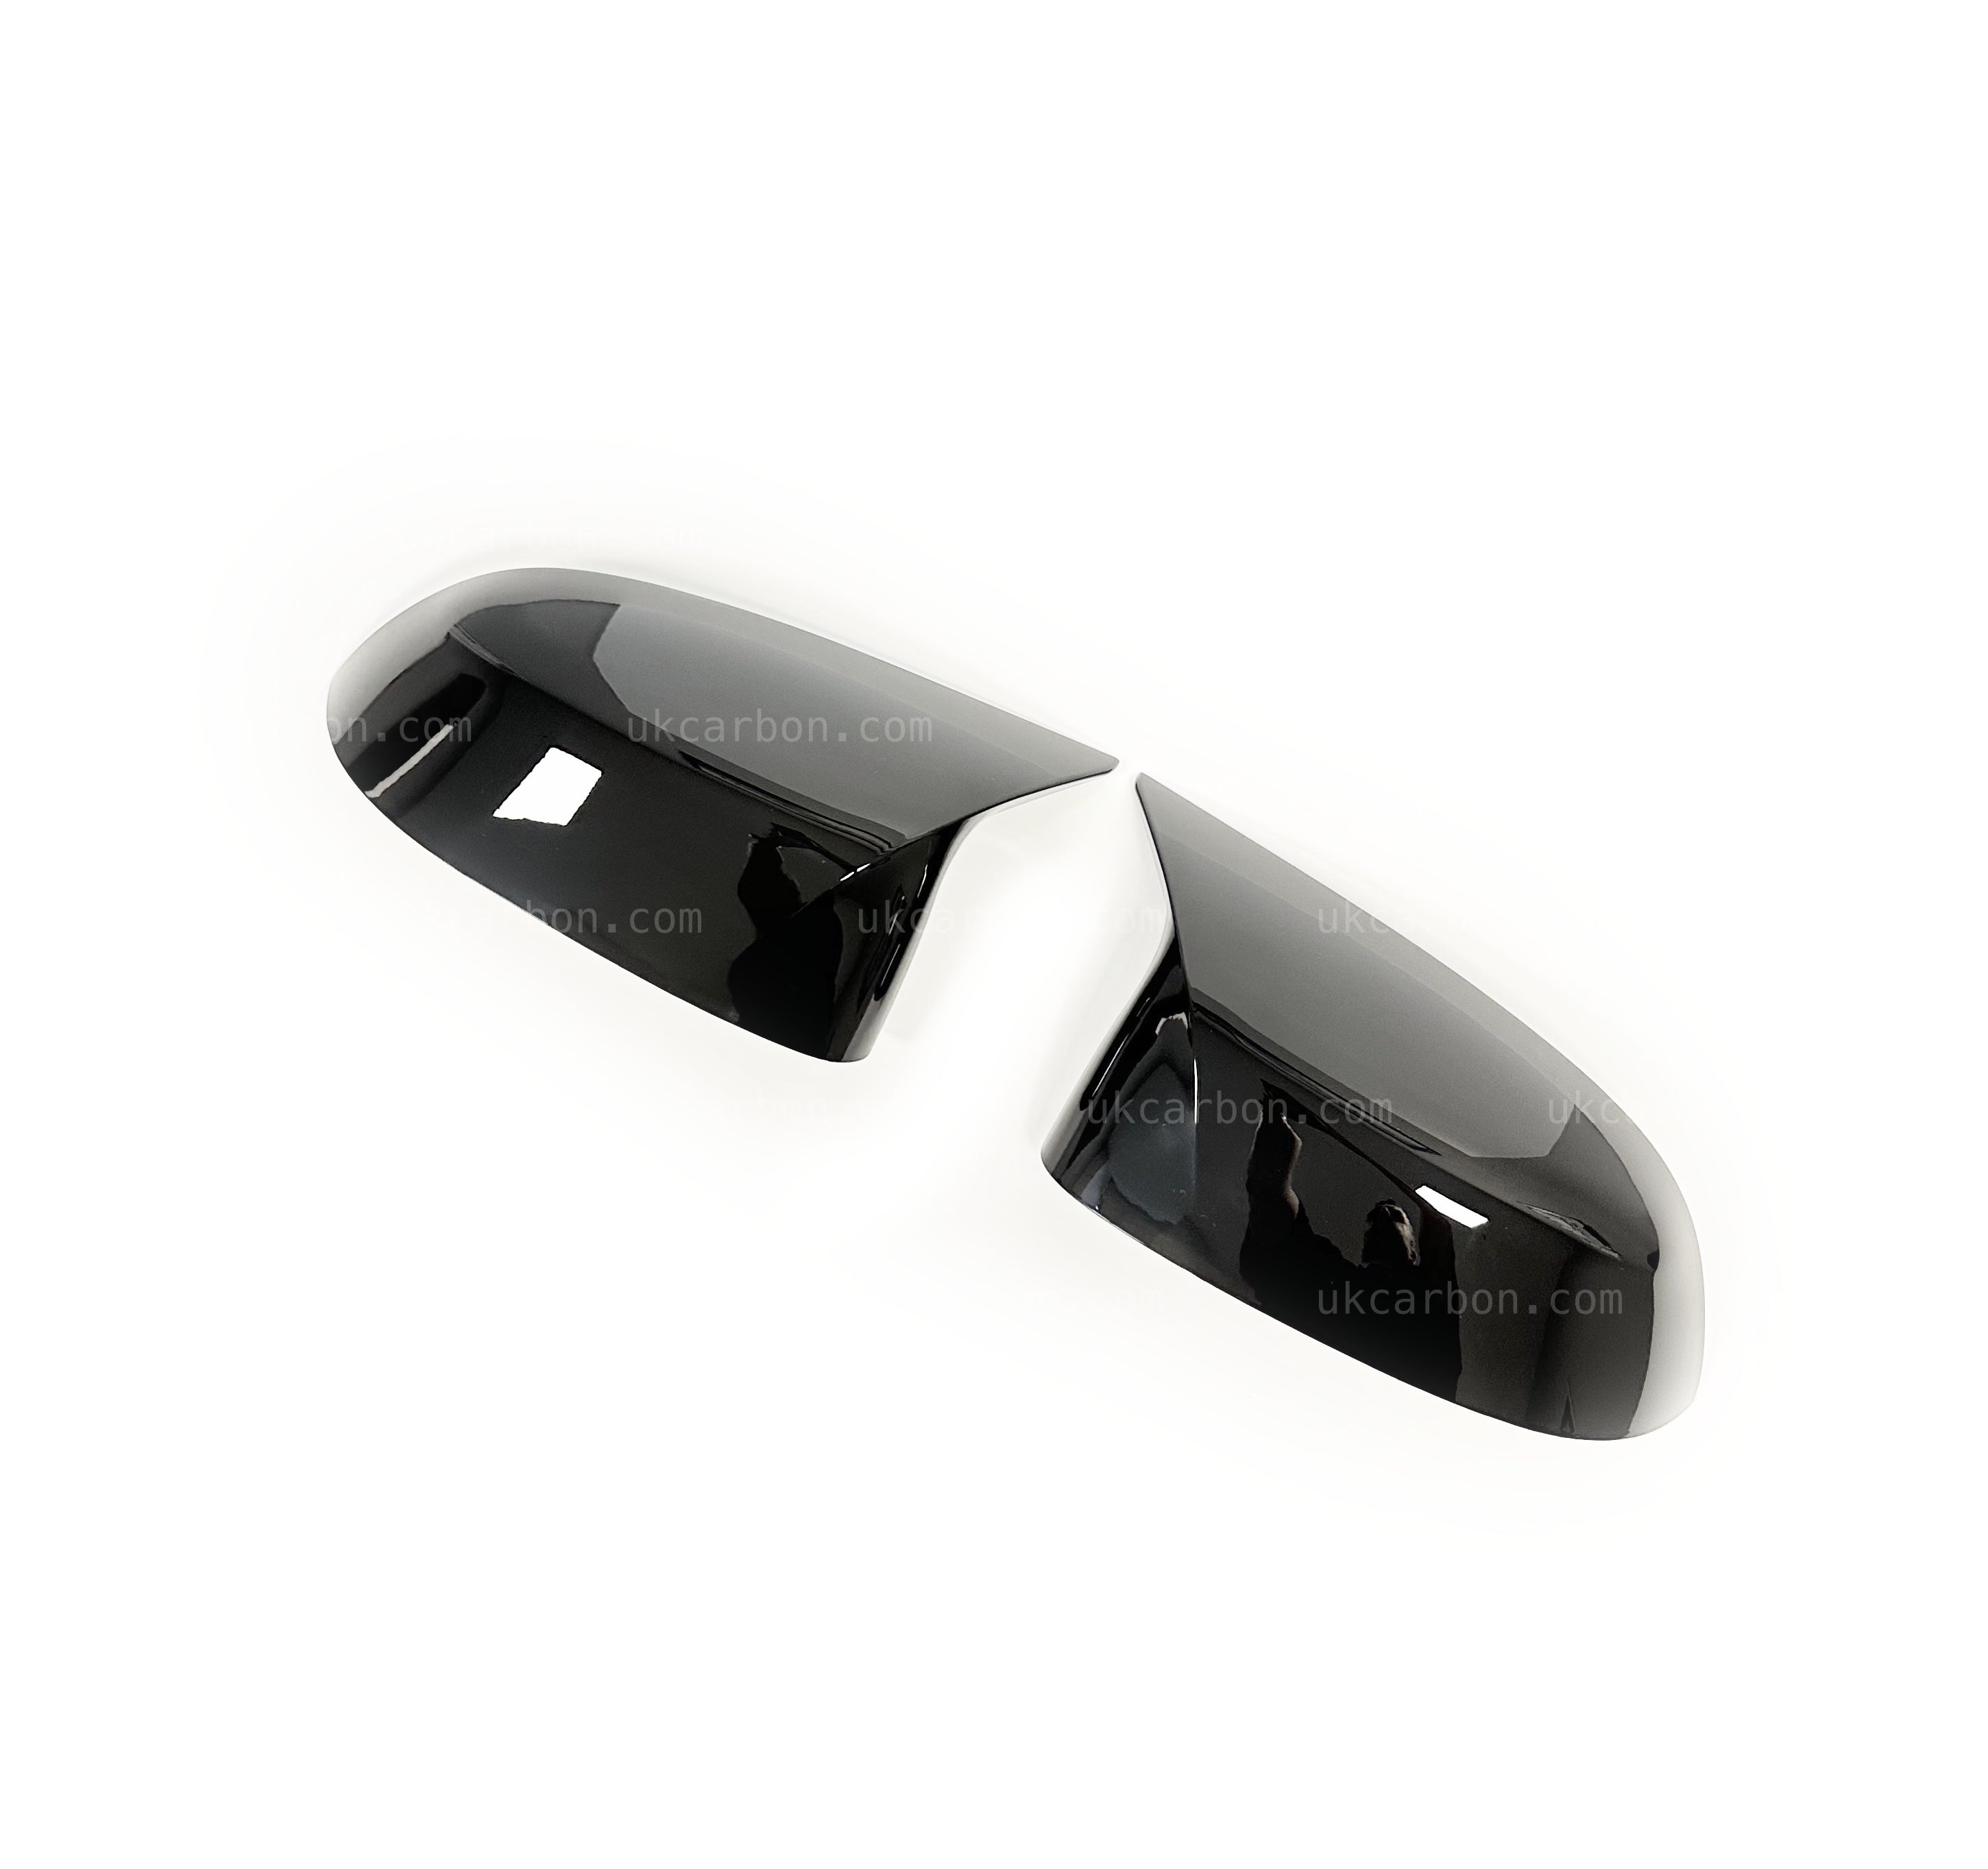 BMW X3 X4 Gloss Black M Style Wing Mirror Cover Replacement G01 G02 by UKCarbon